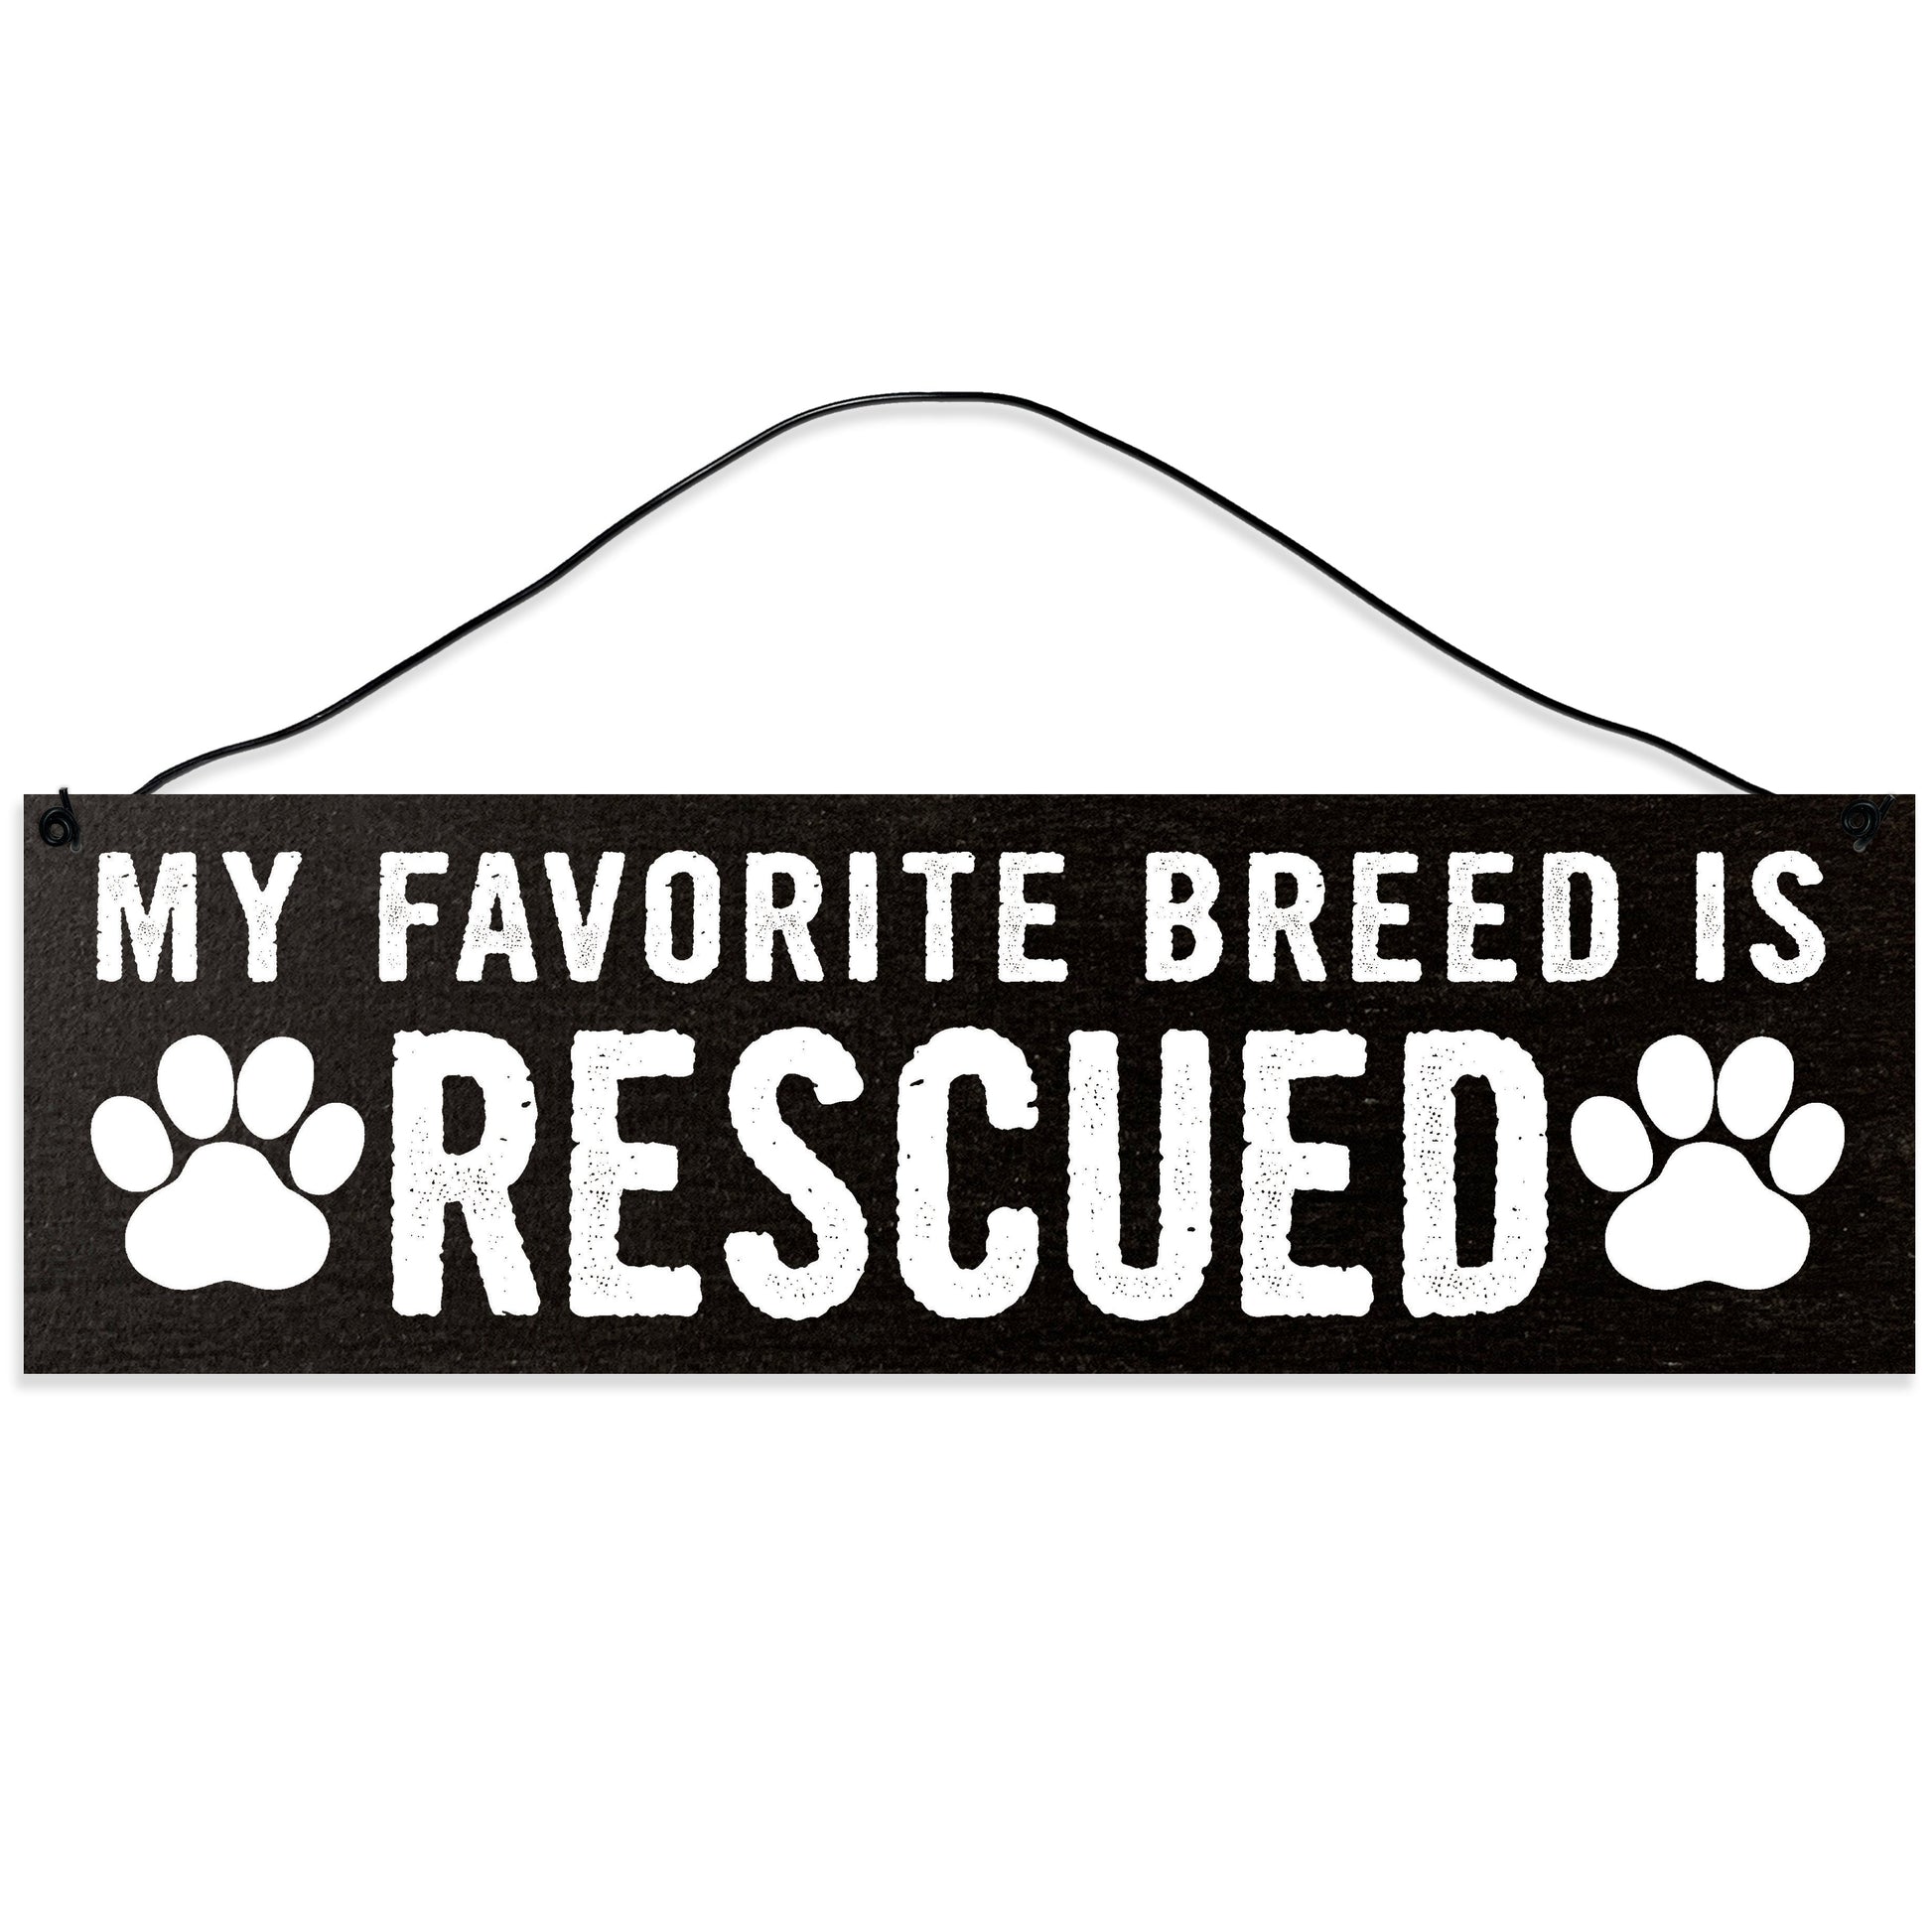 Sawyer's Mill - My Favorite Breed is Rescued. Wood Sign for Home or Office. Measures 3x10 inches.